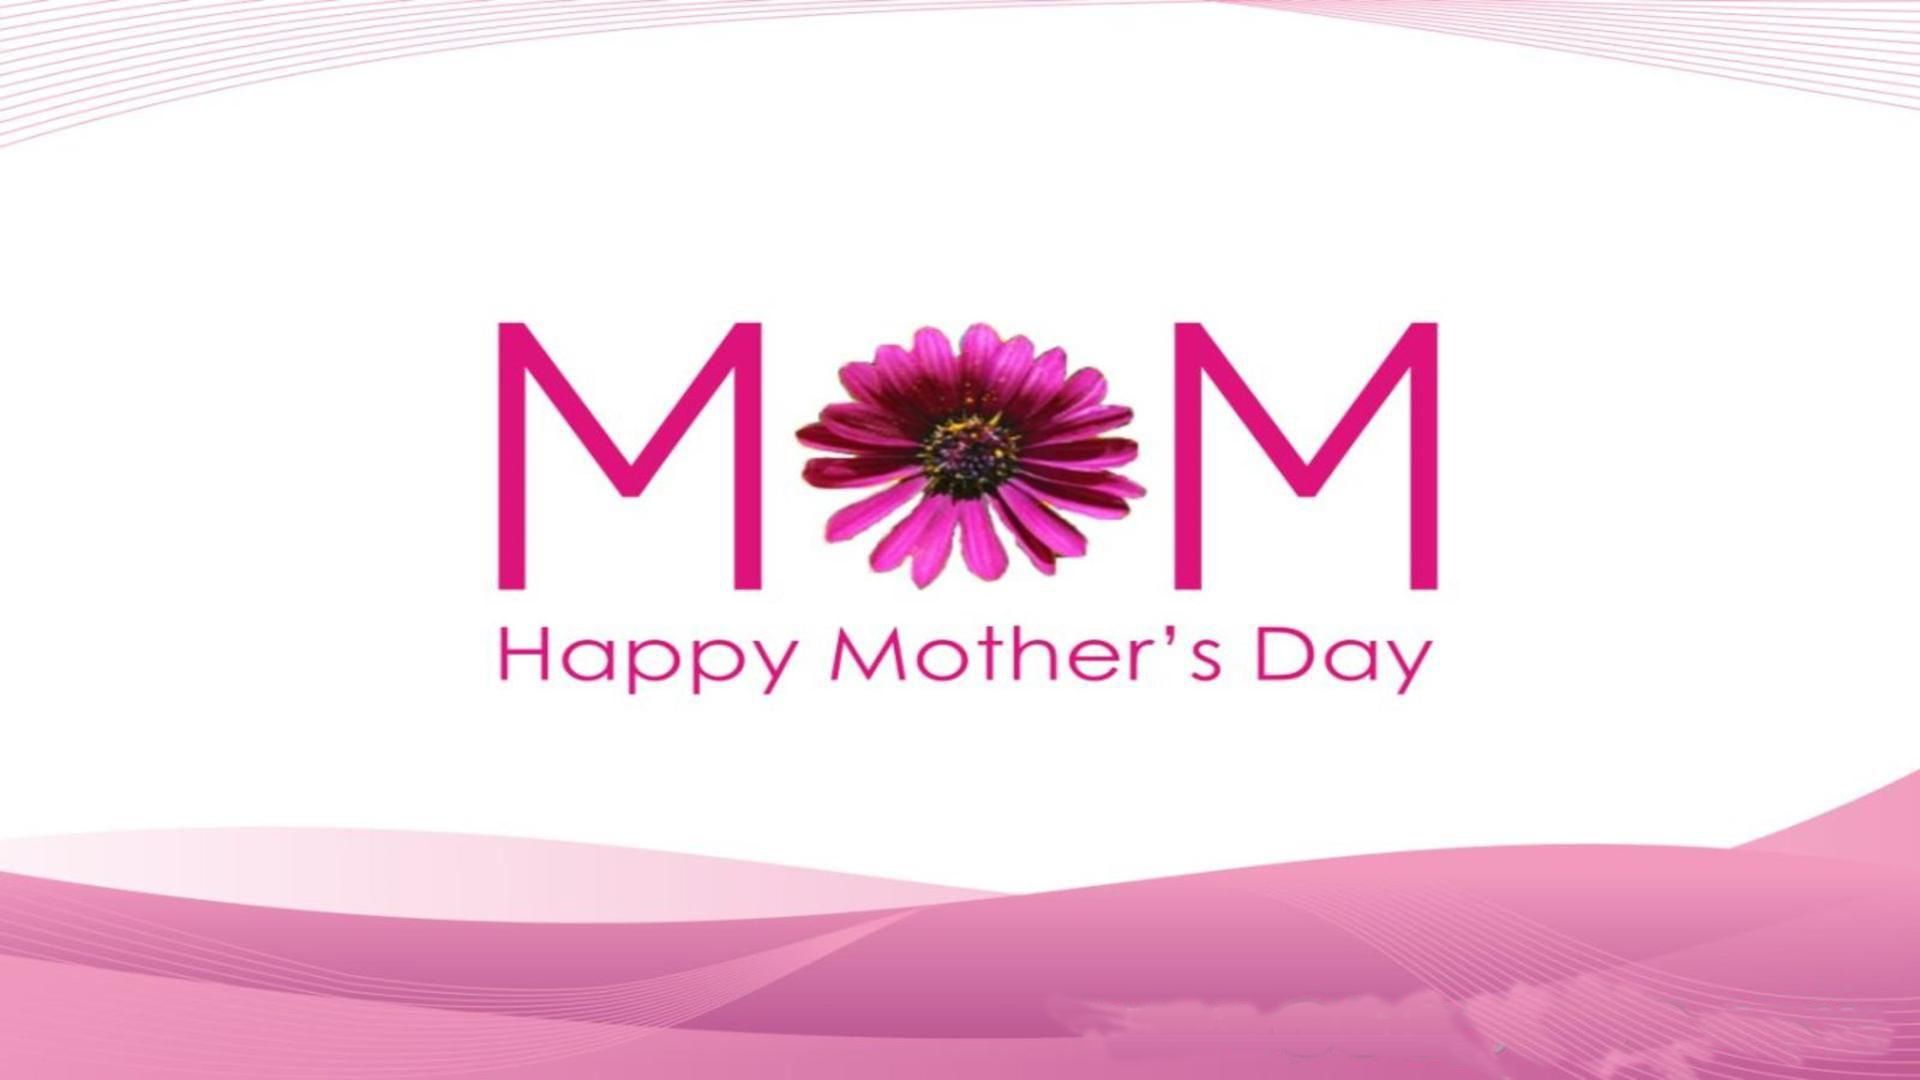 Mothers Day Live HD Wallpaper HQ Pictures, Images, Photos